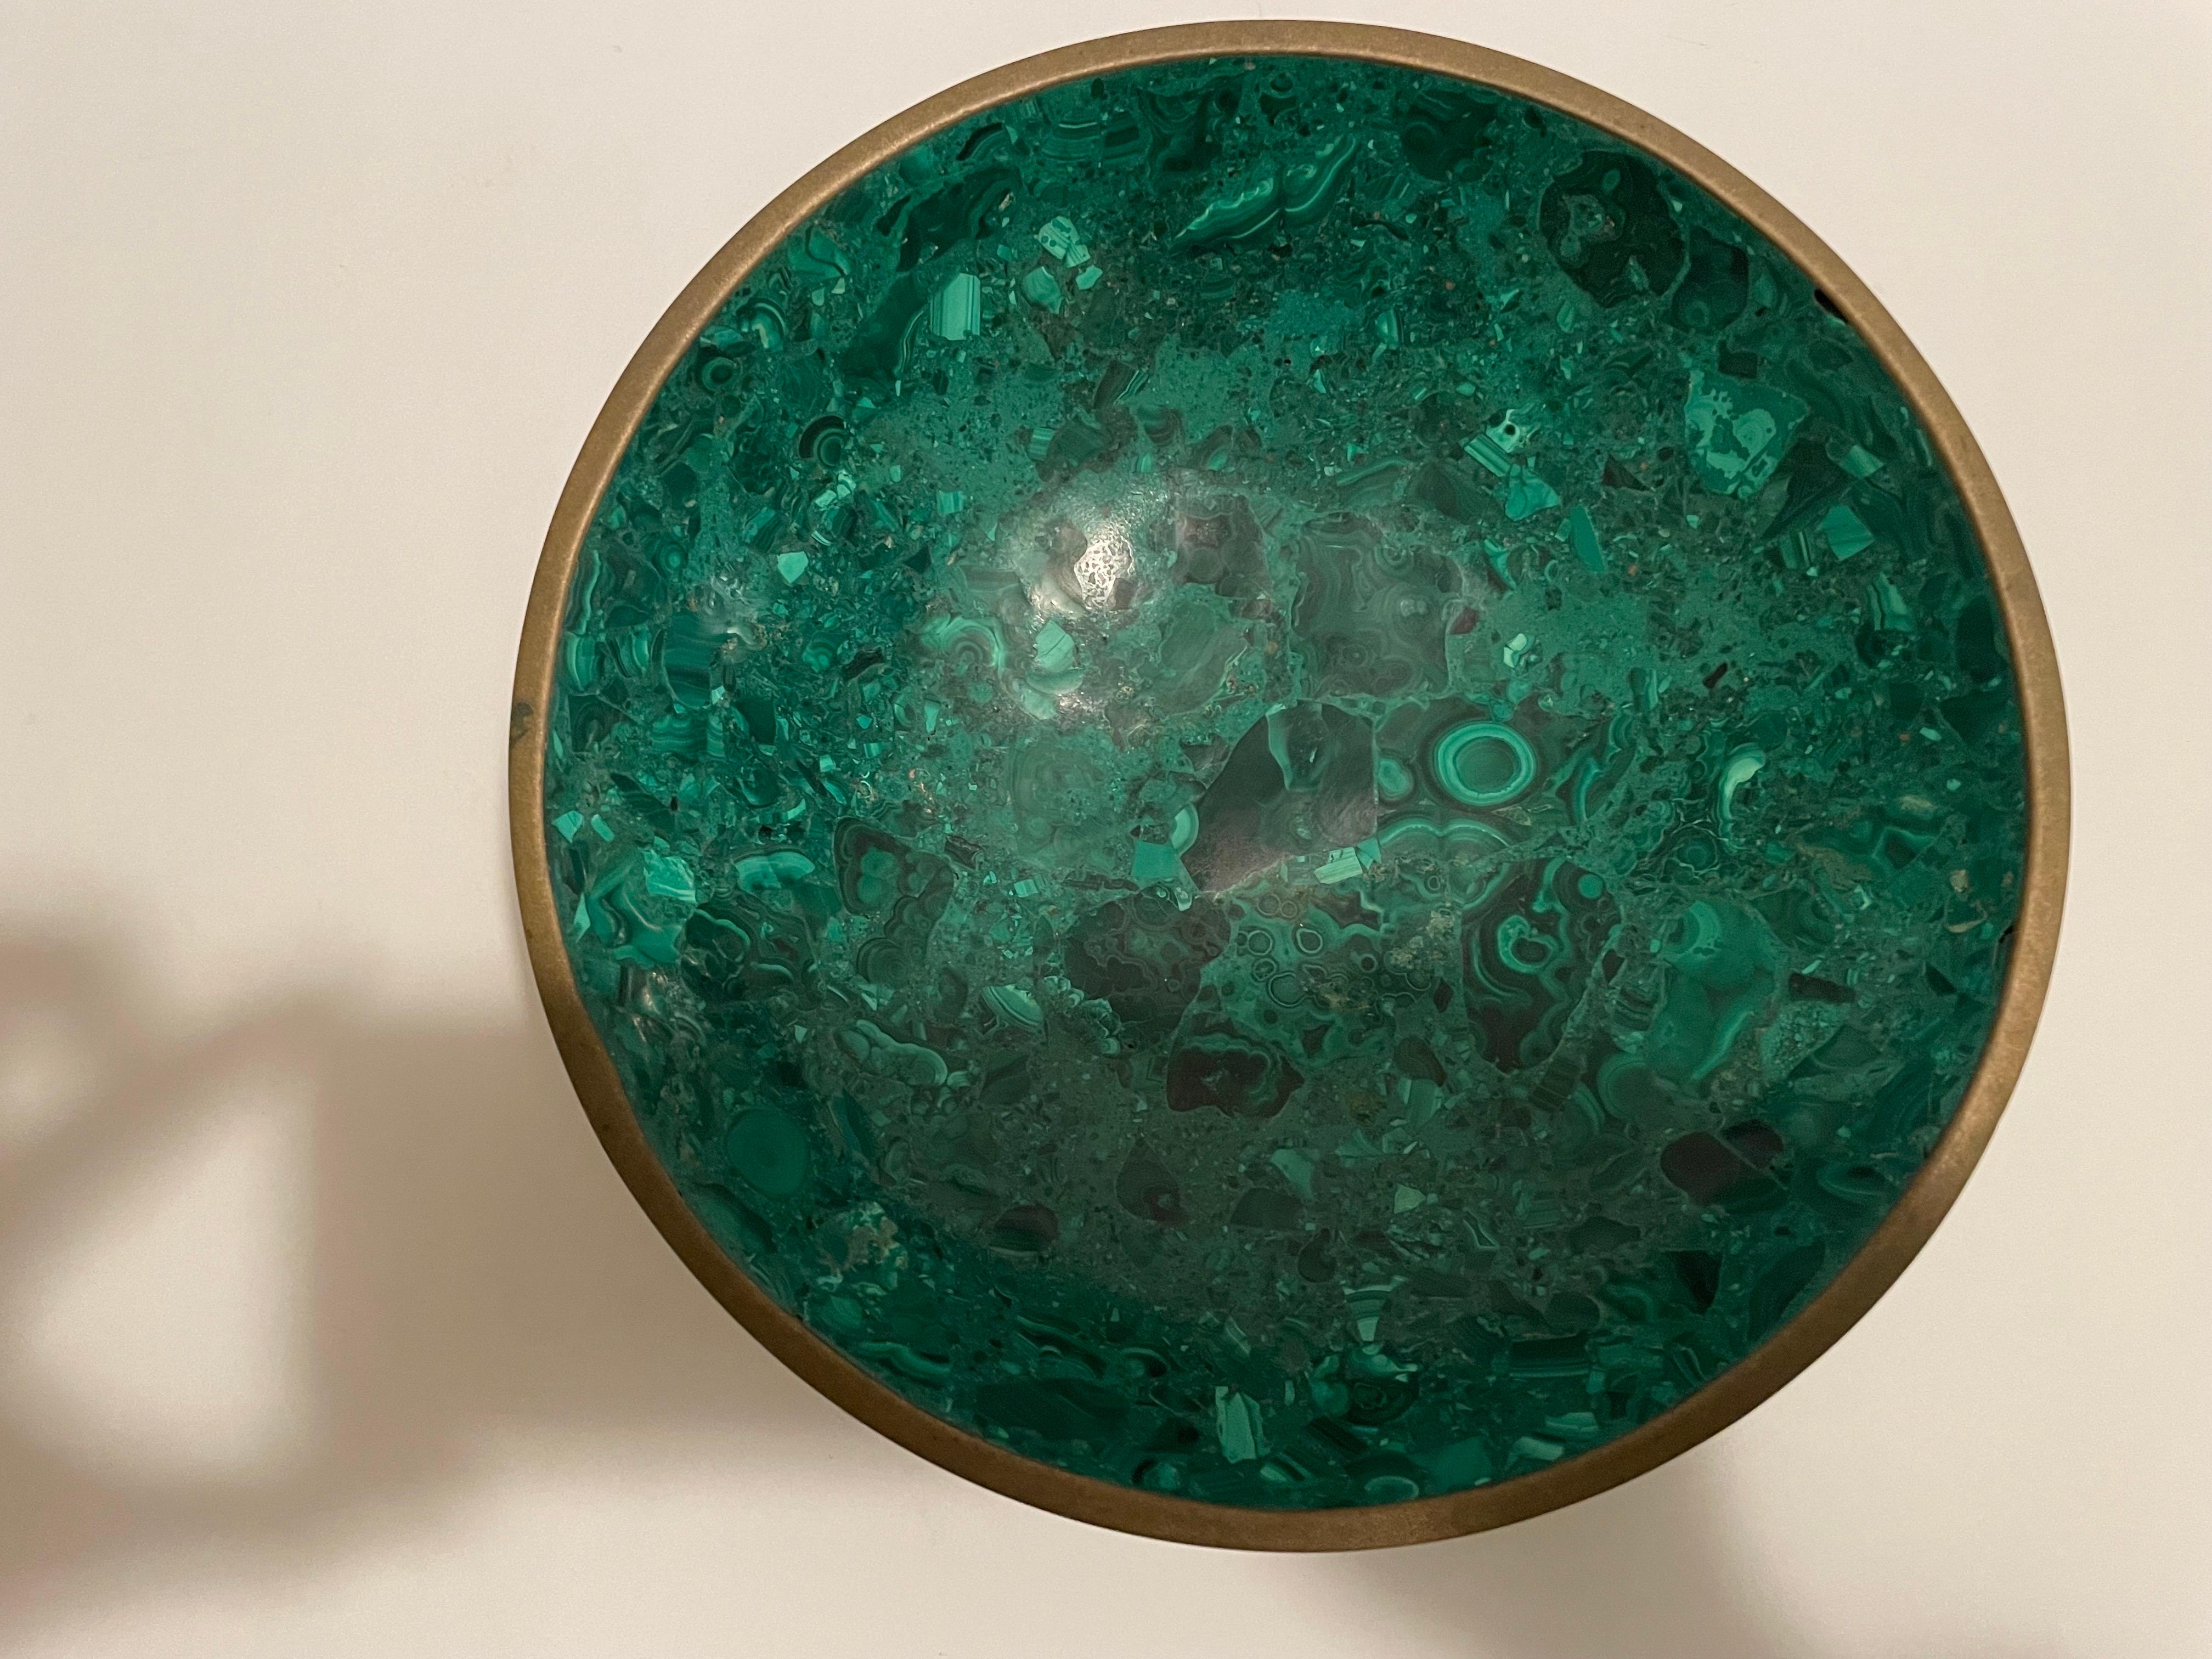 This is a wonderful heavy malachite and brass rimmed bowl from Brazil 